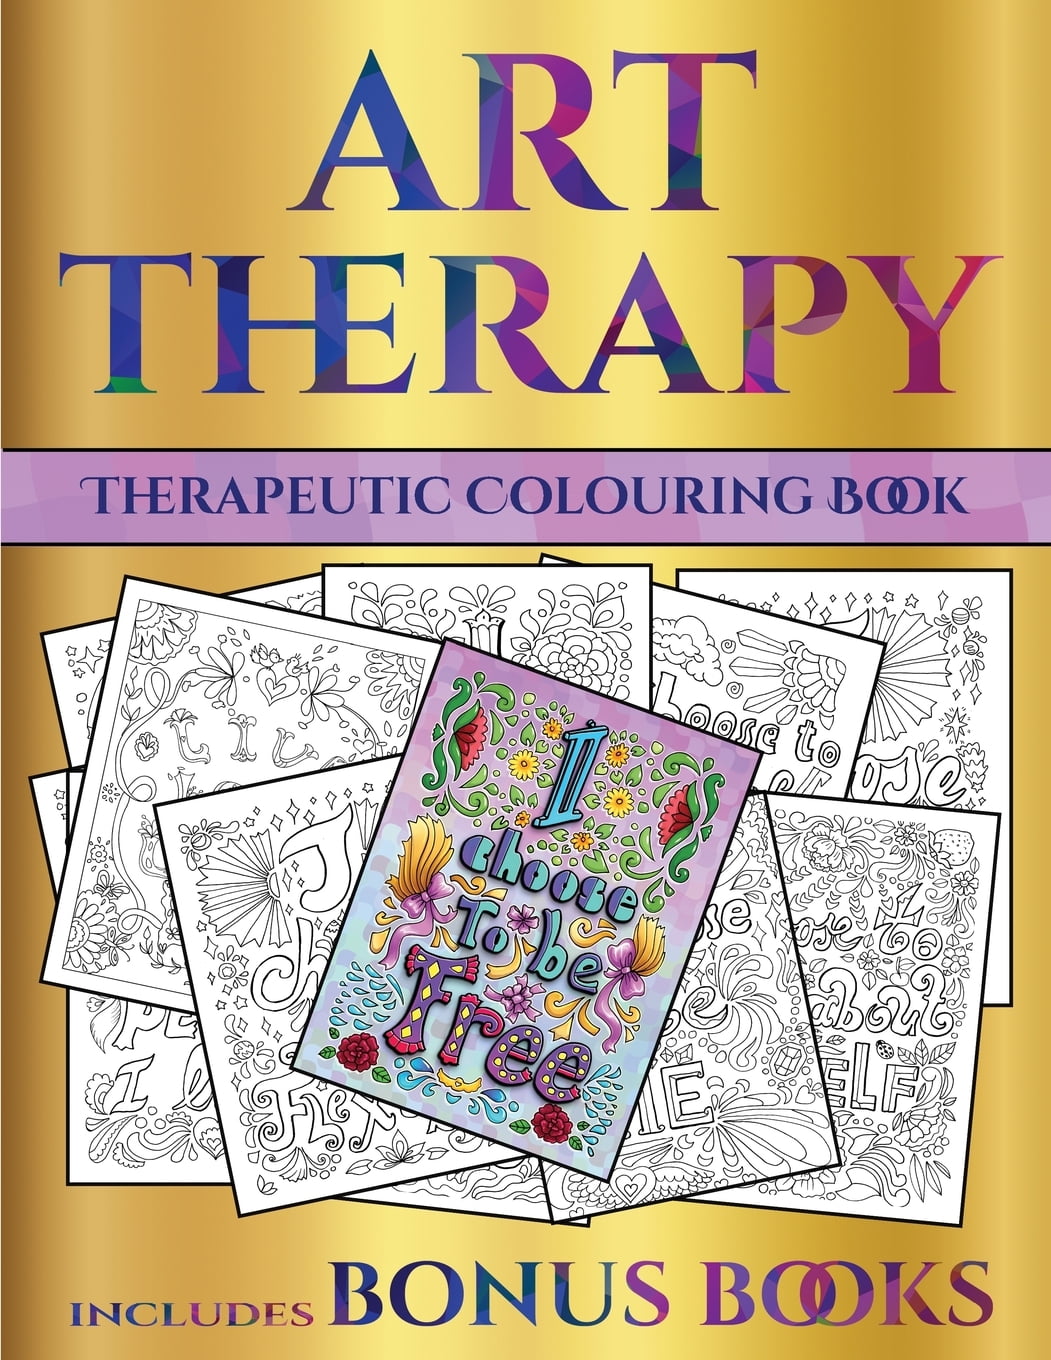 Therapeutic Colouring Book (Art Therapy) : This Book Has ...